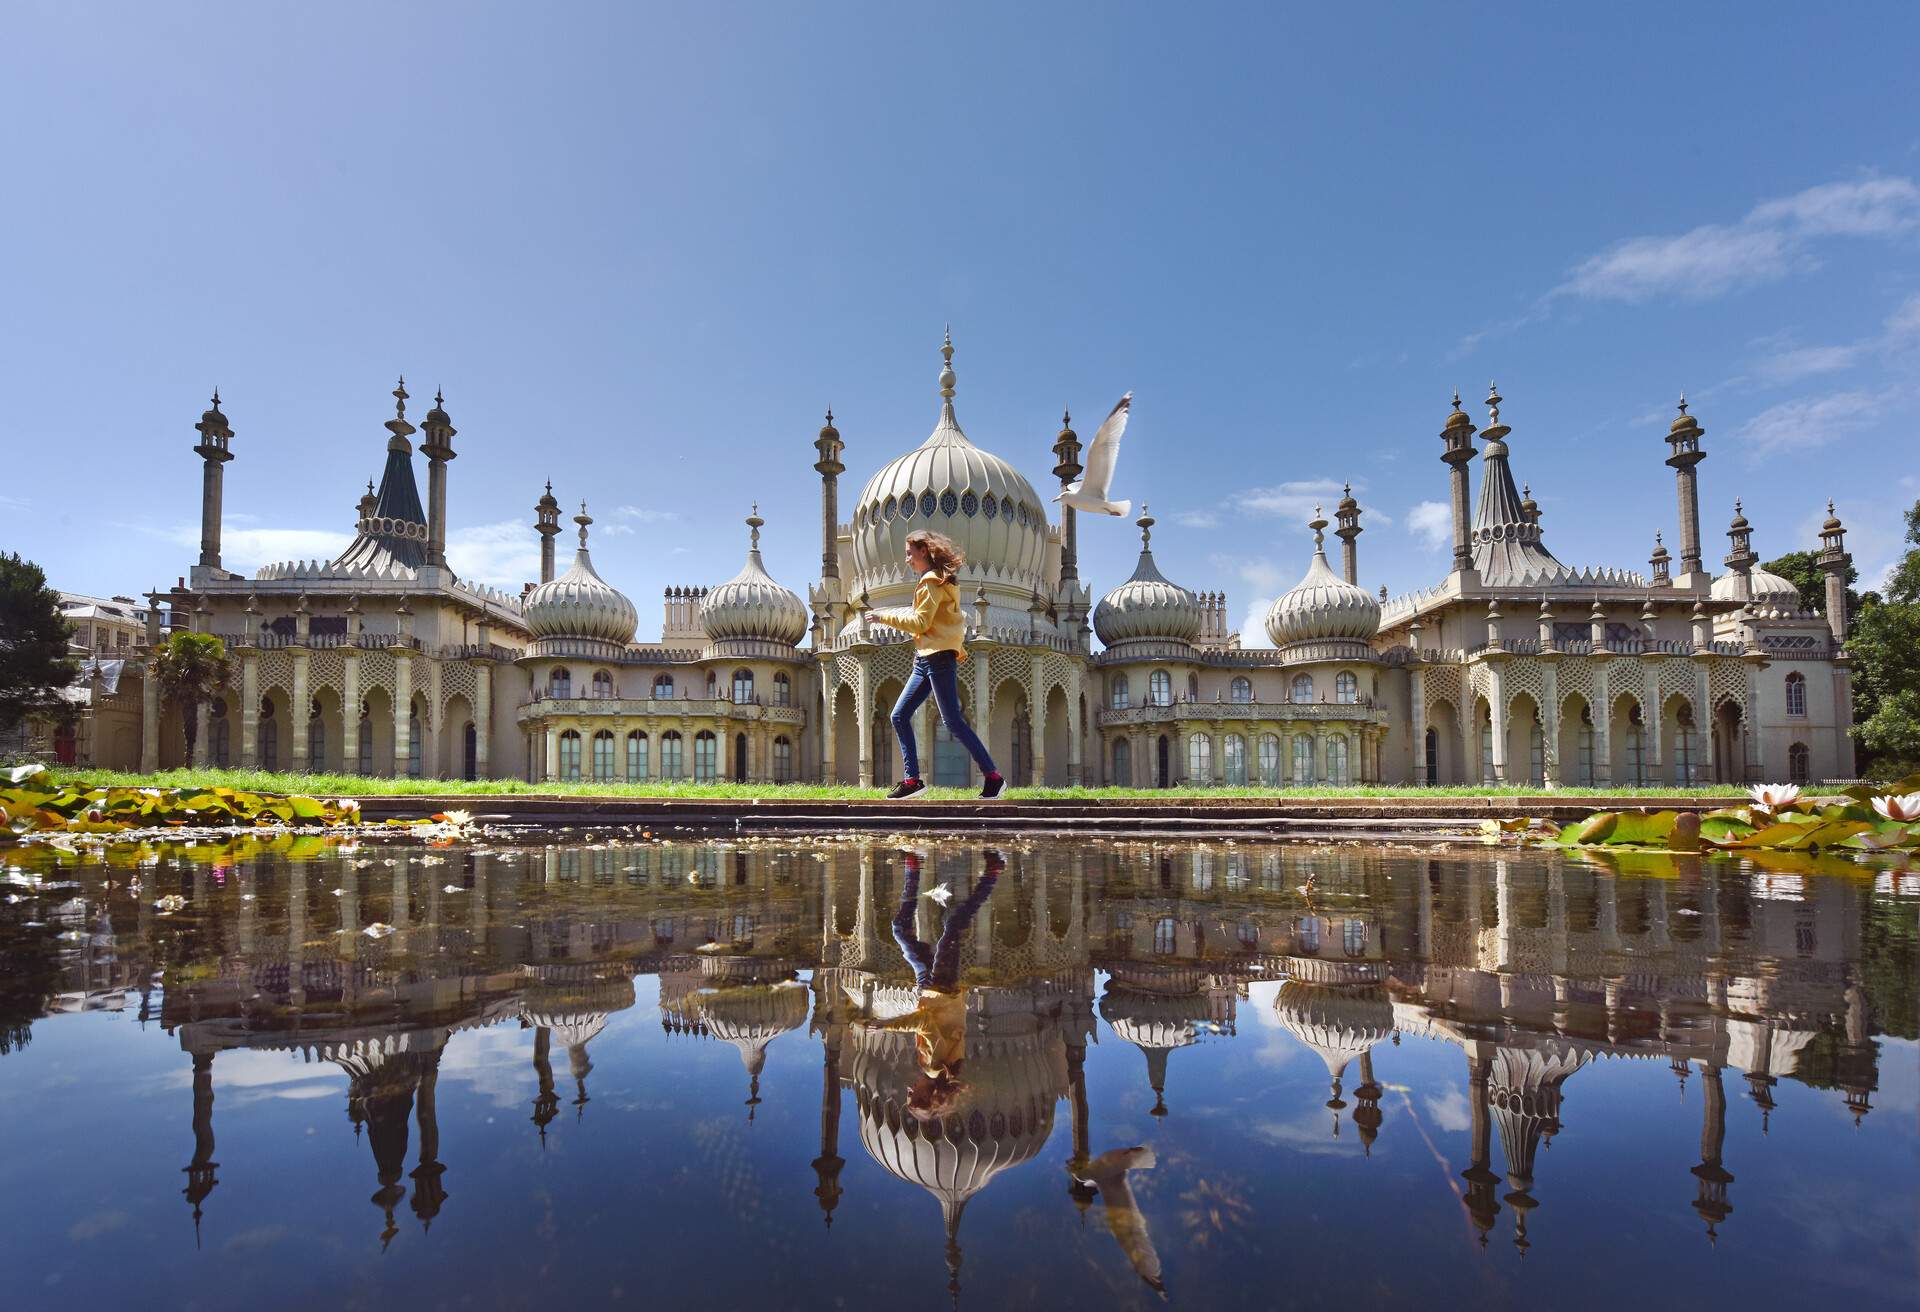 A teenage girl reflected from across a pond - runs pursued by a seagull past the seaside town's landmark Georgian Royal Pavilion with it's famous domes and minarets